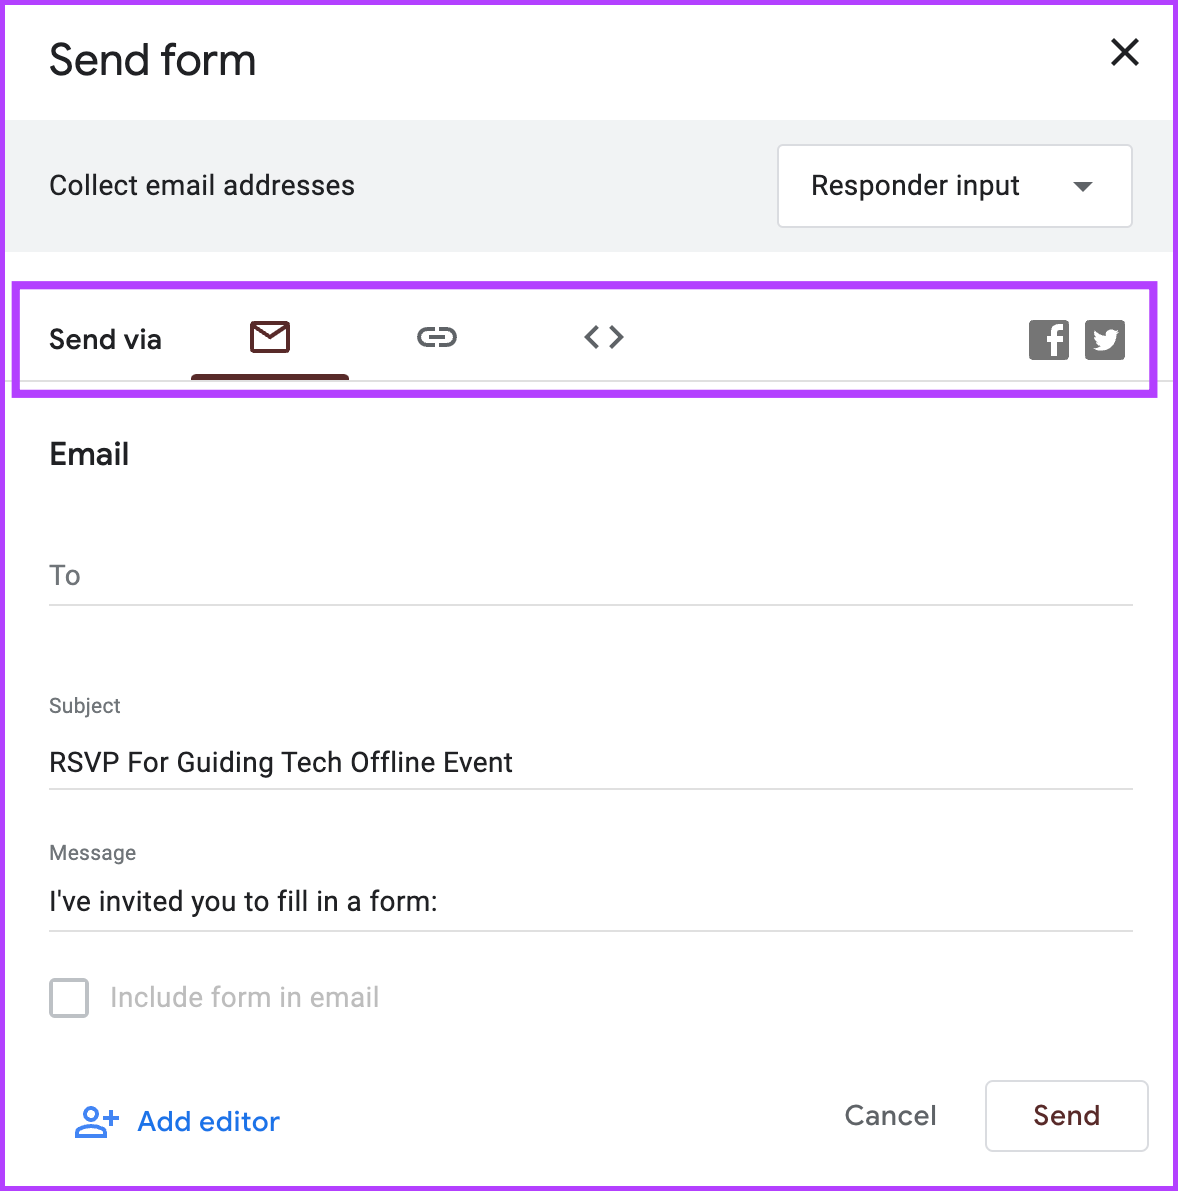 Select the methods to share your RSVP Google Forms